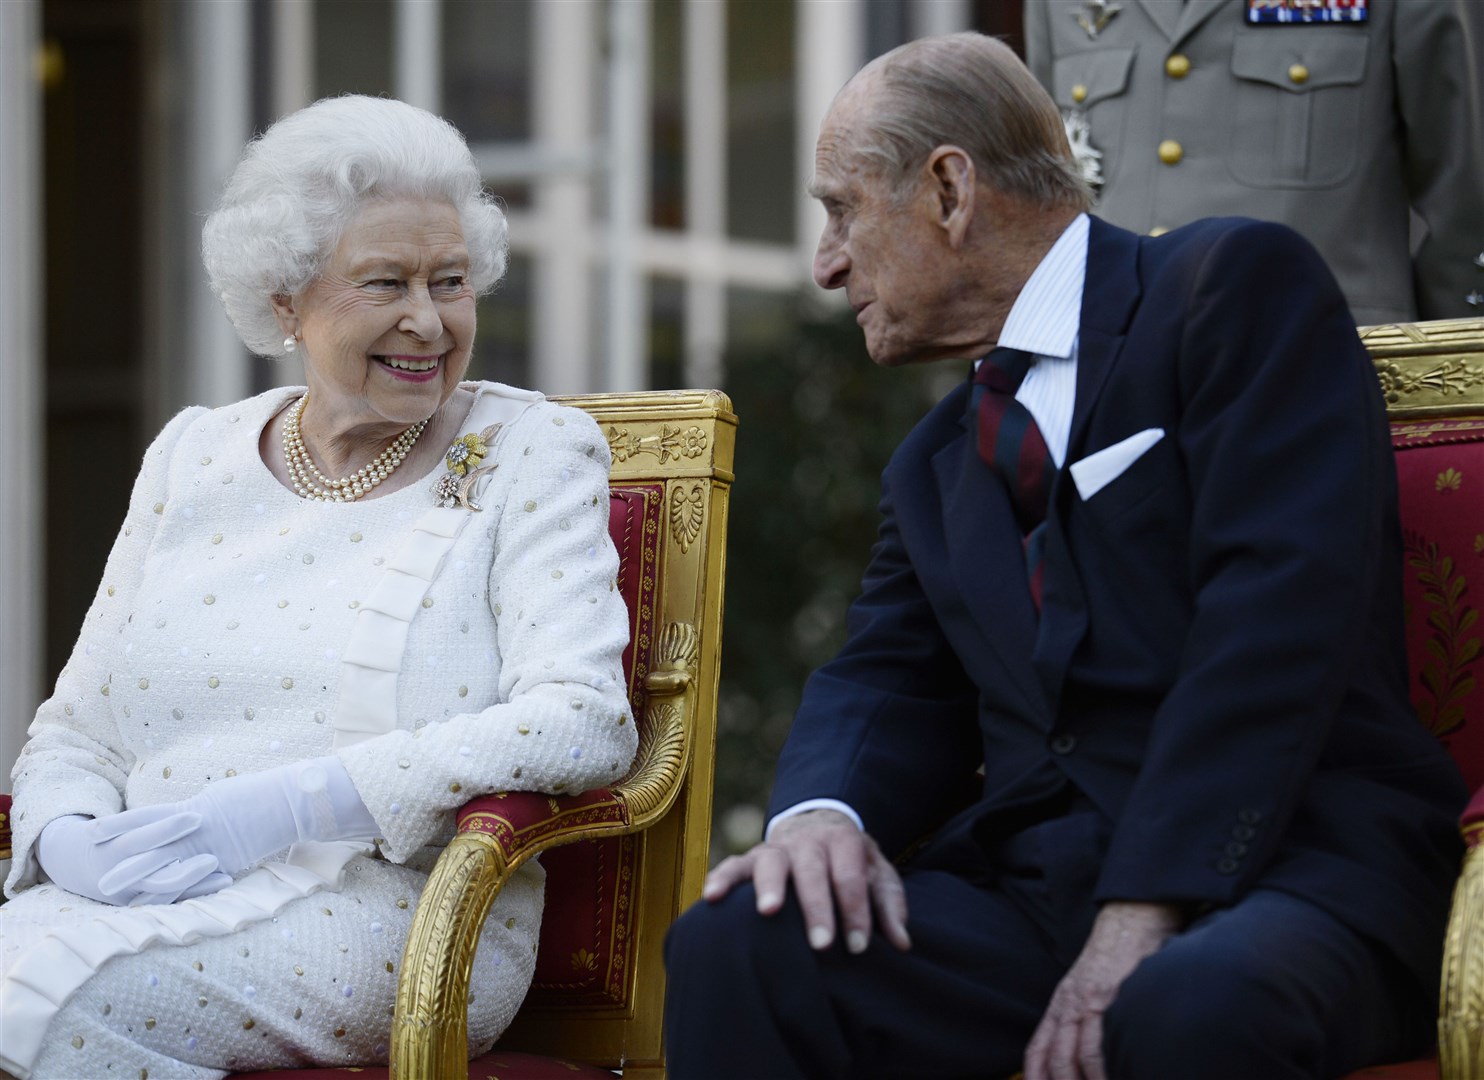 The Queen described Philip as her ‘constant strength and guide’ (Owen Humphreys/PA)